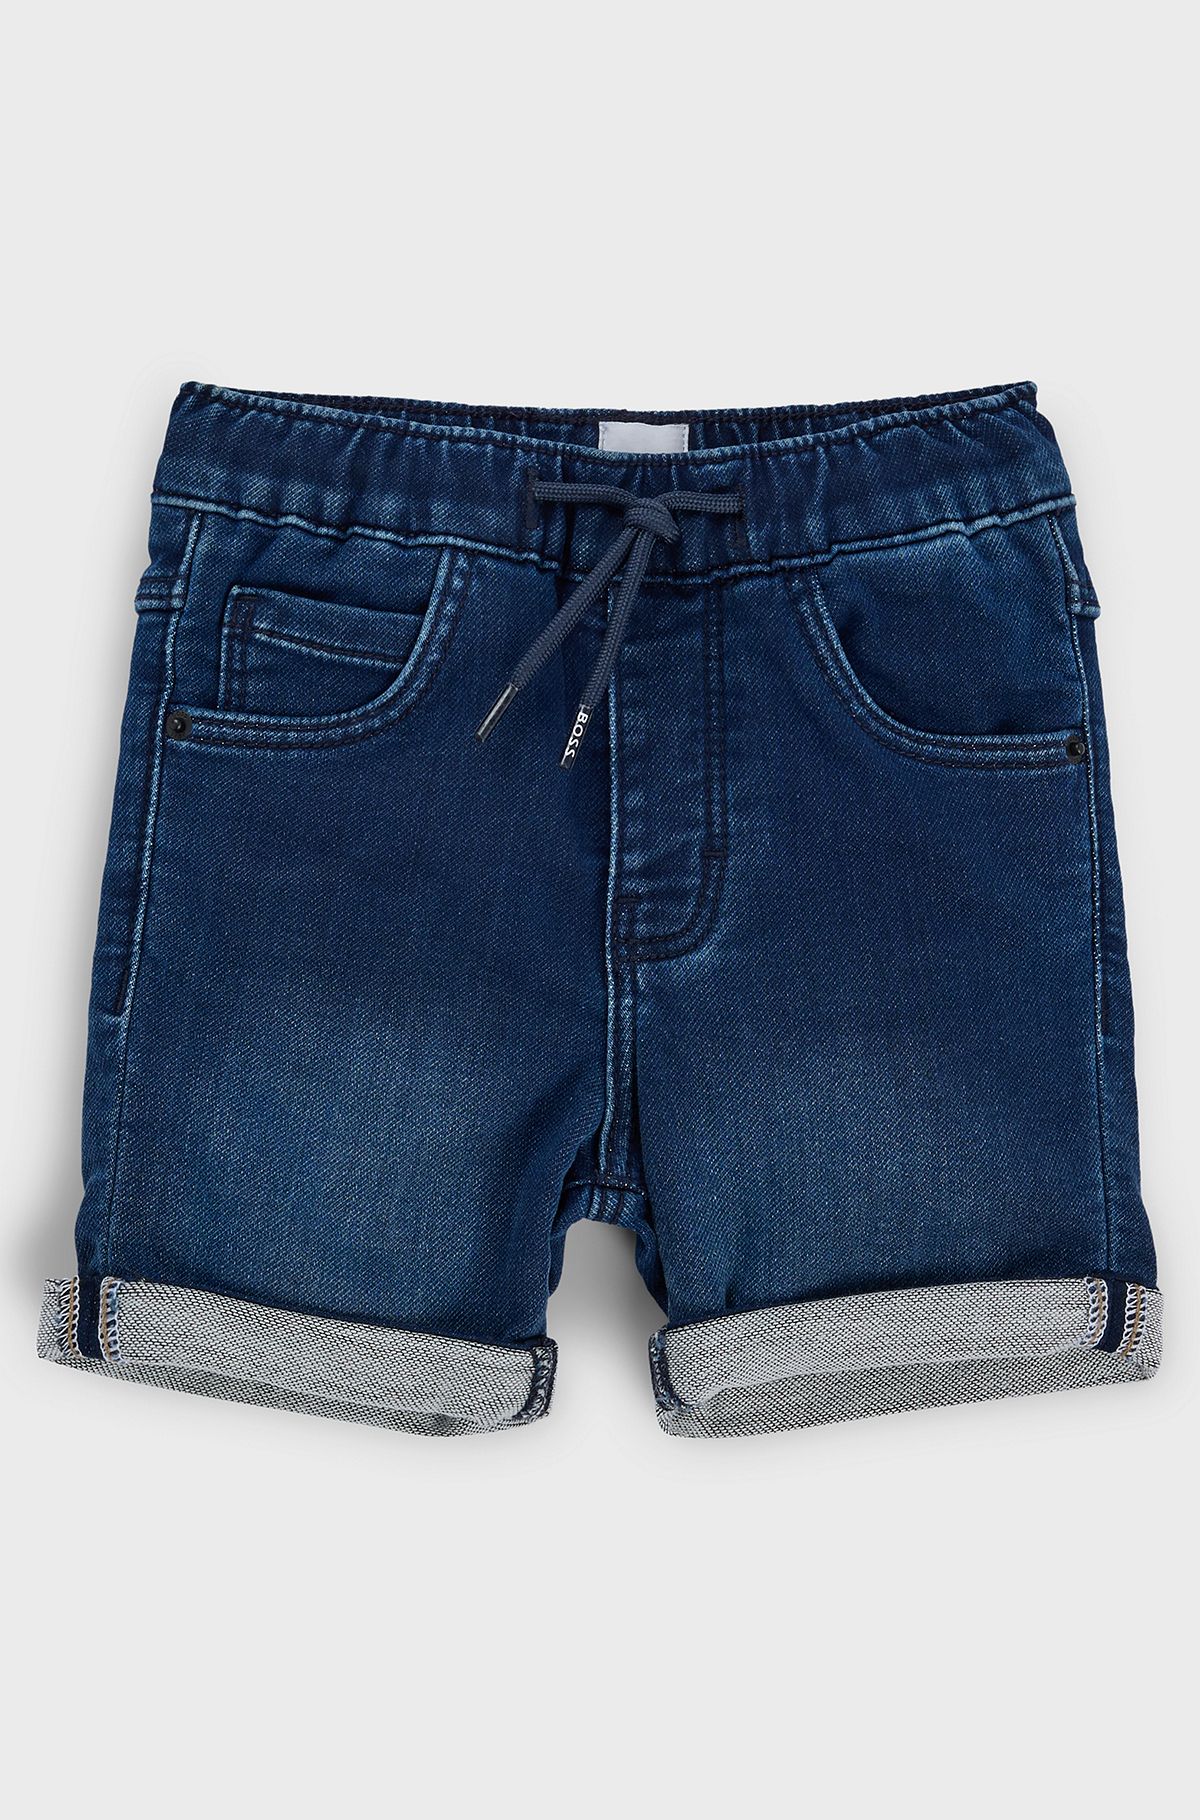 Kids' shorts in knitted blue stretch denim, Patterned